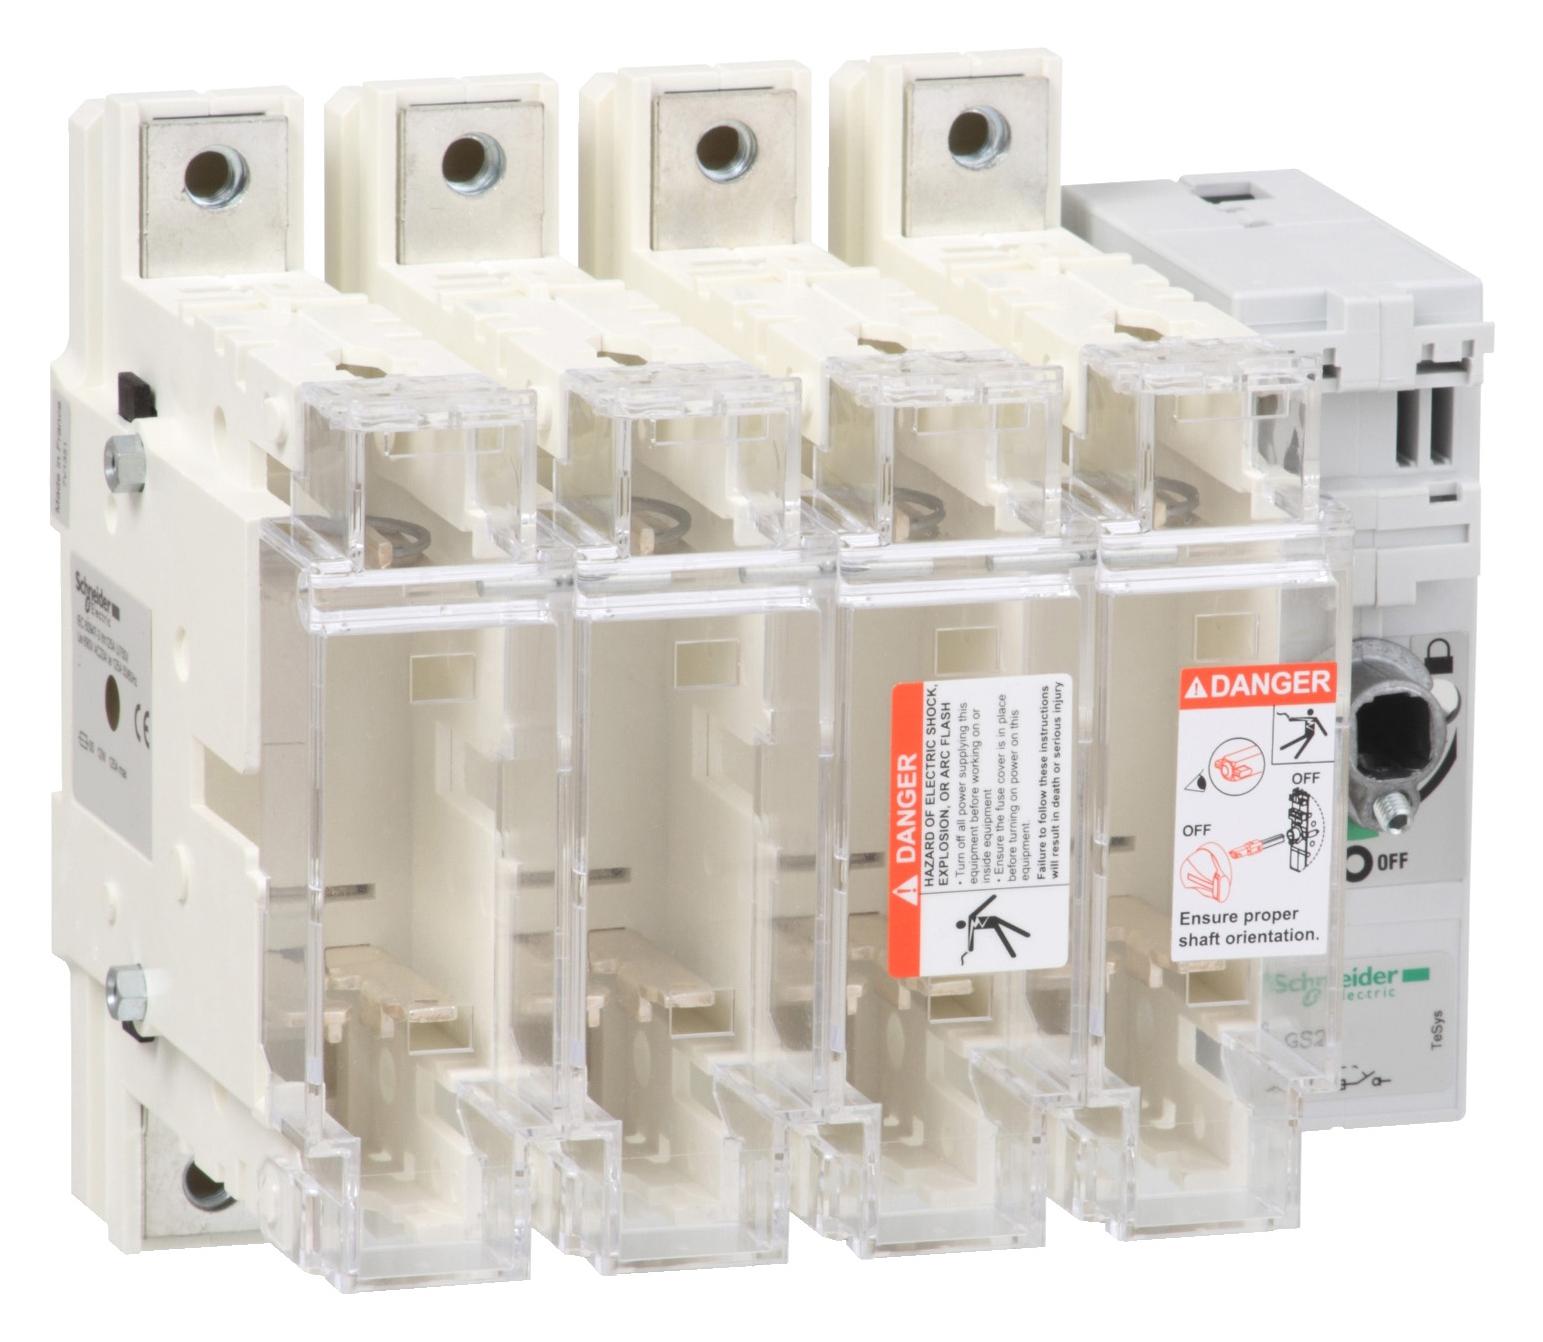 SCHNEIDER ELECTRIC Fused GS2QQ4 FUSE DISCONNECT SW. 4X 400A 2 SCHNEIDER ELECTRIC 3406294 GS2QQ4